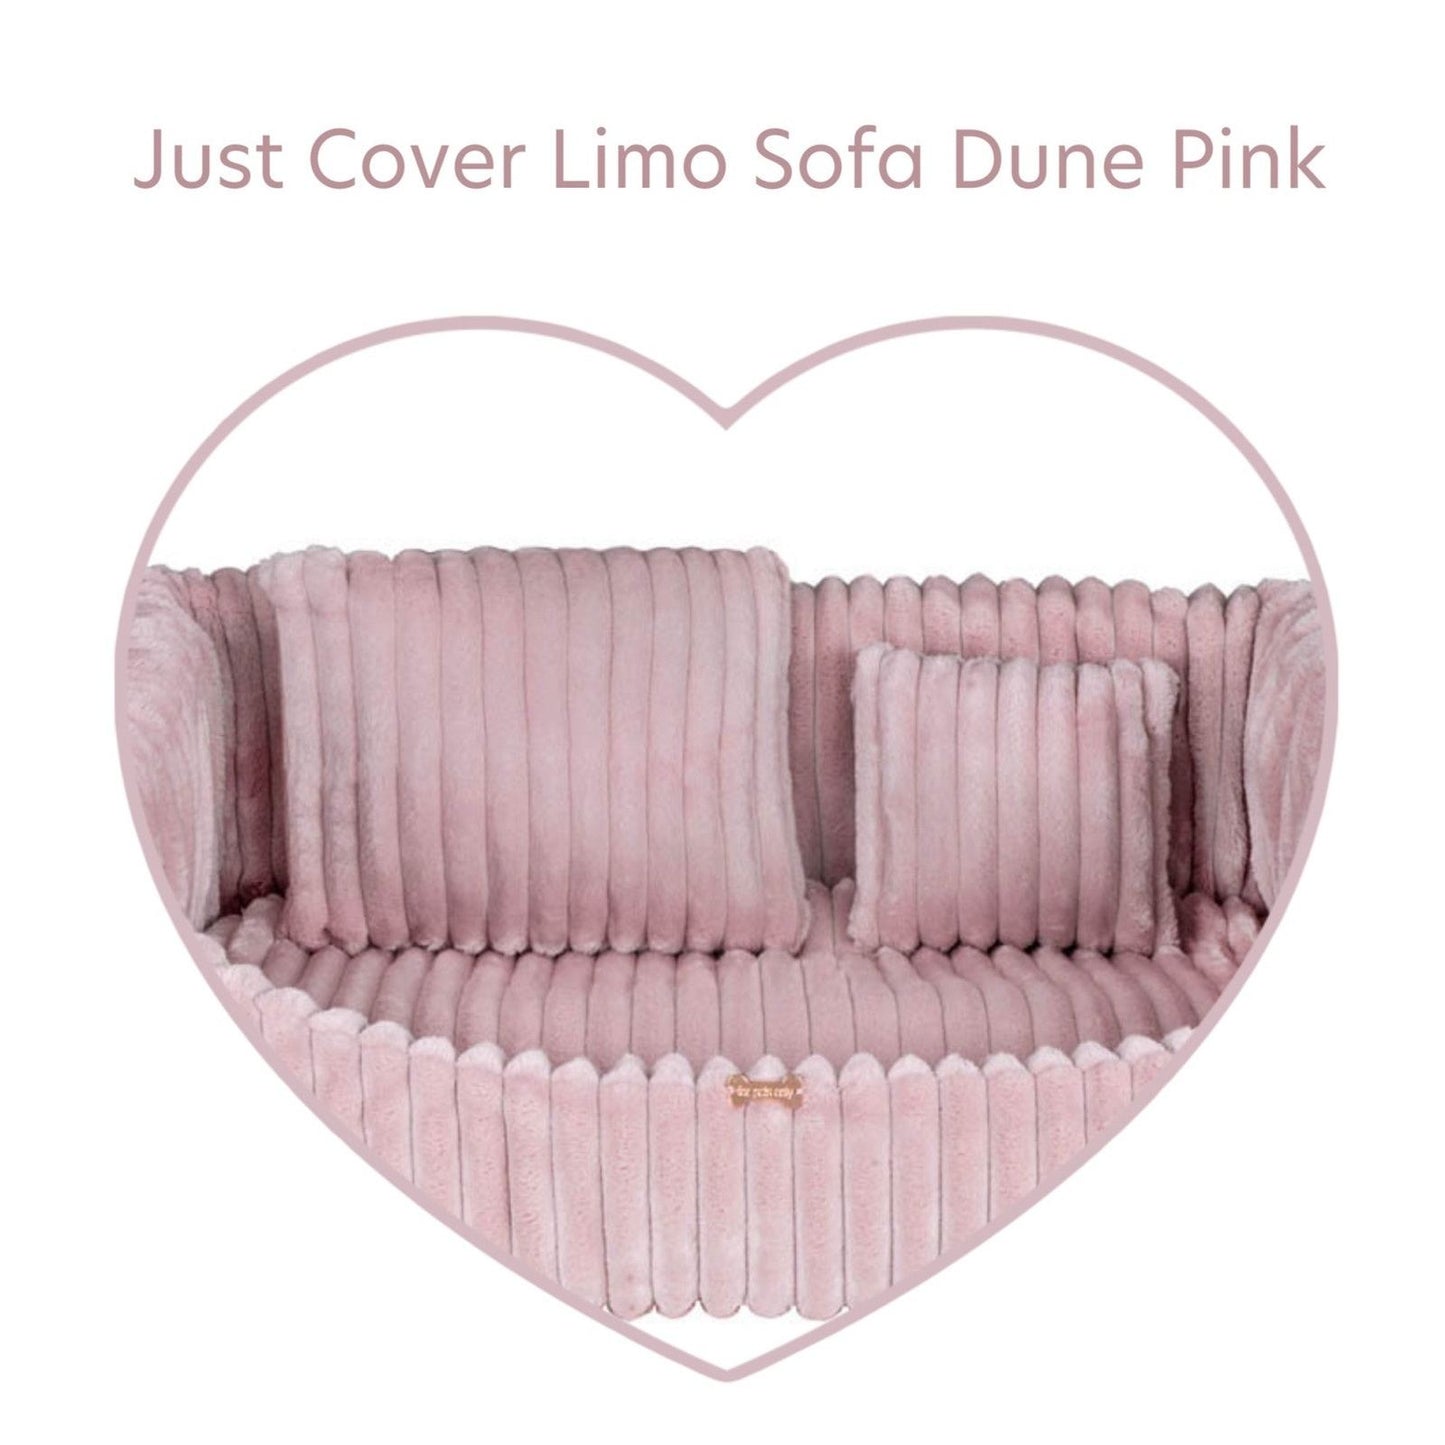 For Pets Only Cuccia Limo Sofa Dune Pink